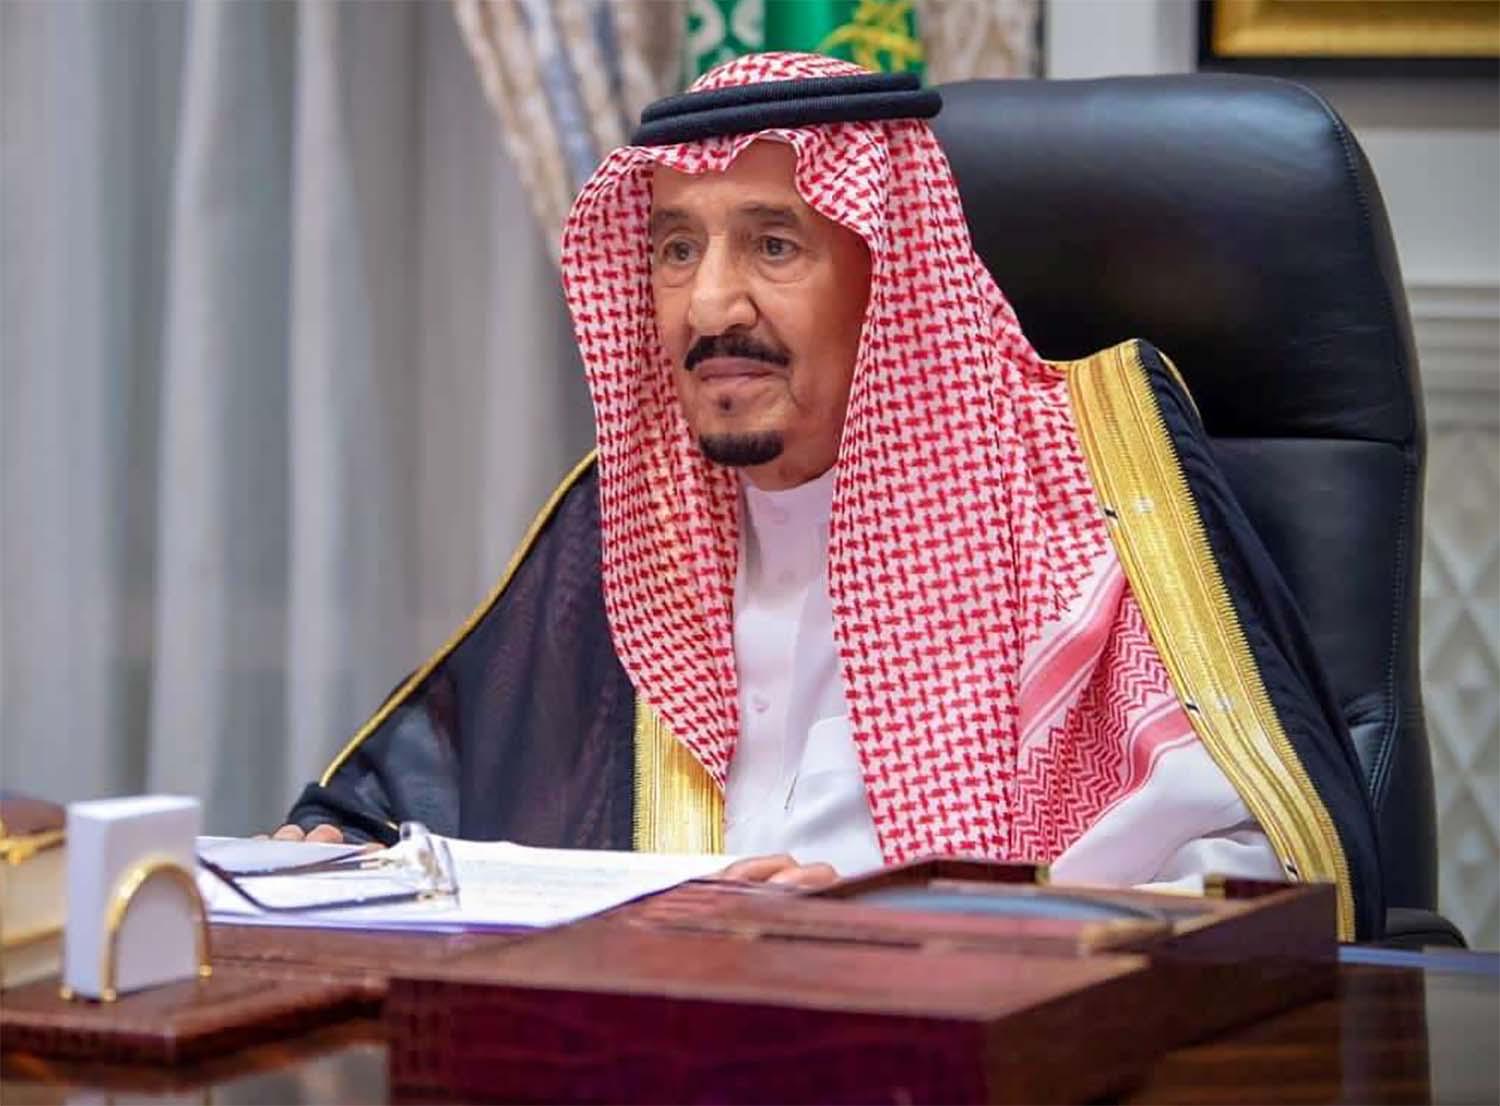 King Salman said the kingdom continues to support UN-led efforts to reach a political settlement in Yemen